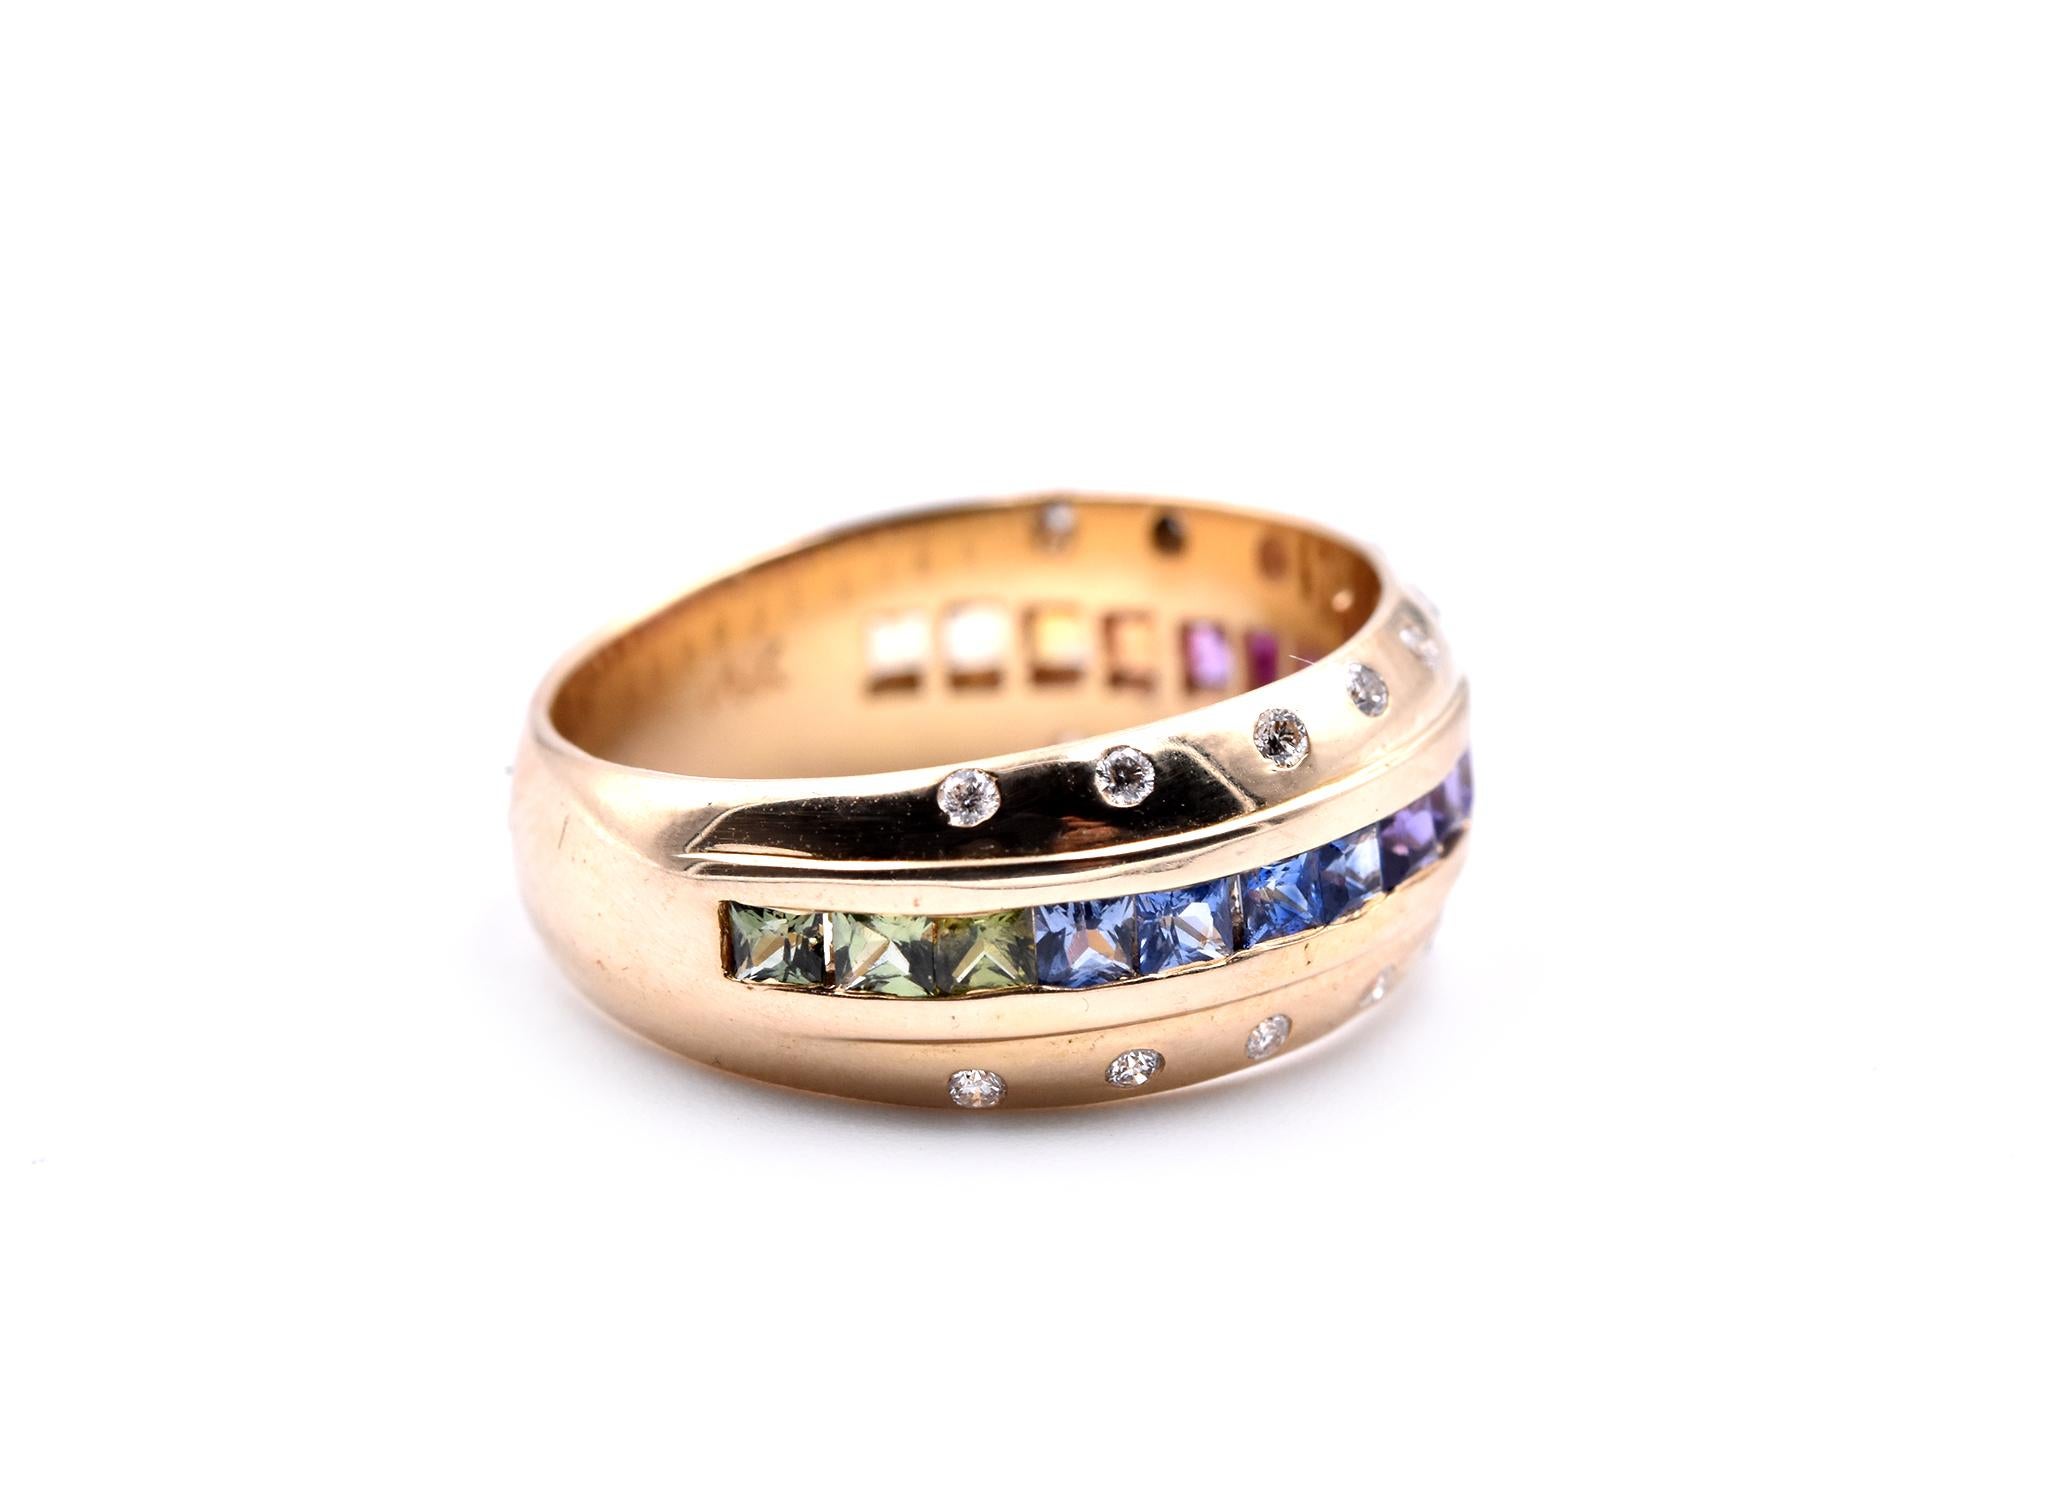 Designer: custom design
Material: 14k yellow gold
Sapphires: 19 sapphires =1.16cttw
Diamonds: 20 round brilliant cut = .26cttw
Color: G
Clarity: VS
Size: 7 ½ (please allow two additional shipping days for sizing requests)
Dimensions: ring is 8.10mm